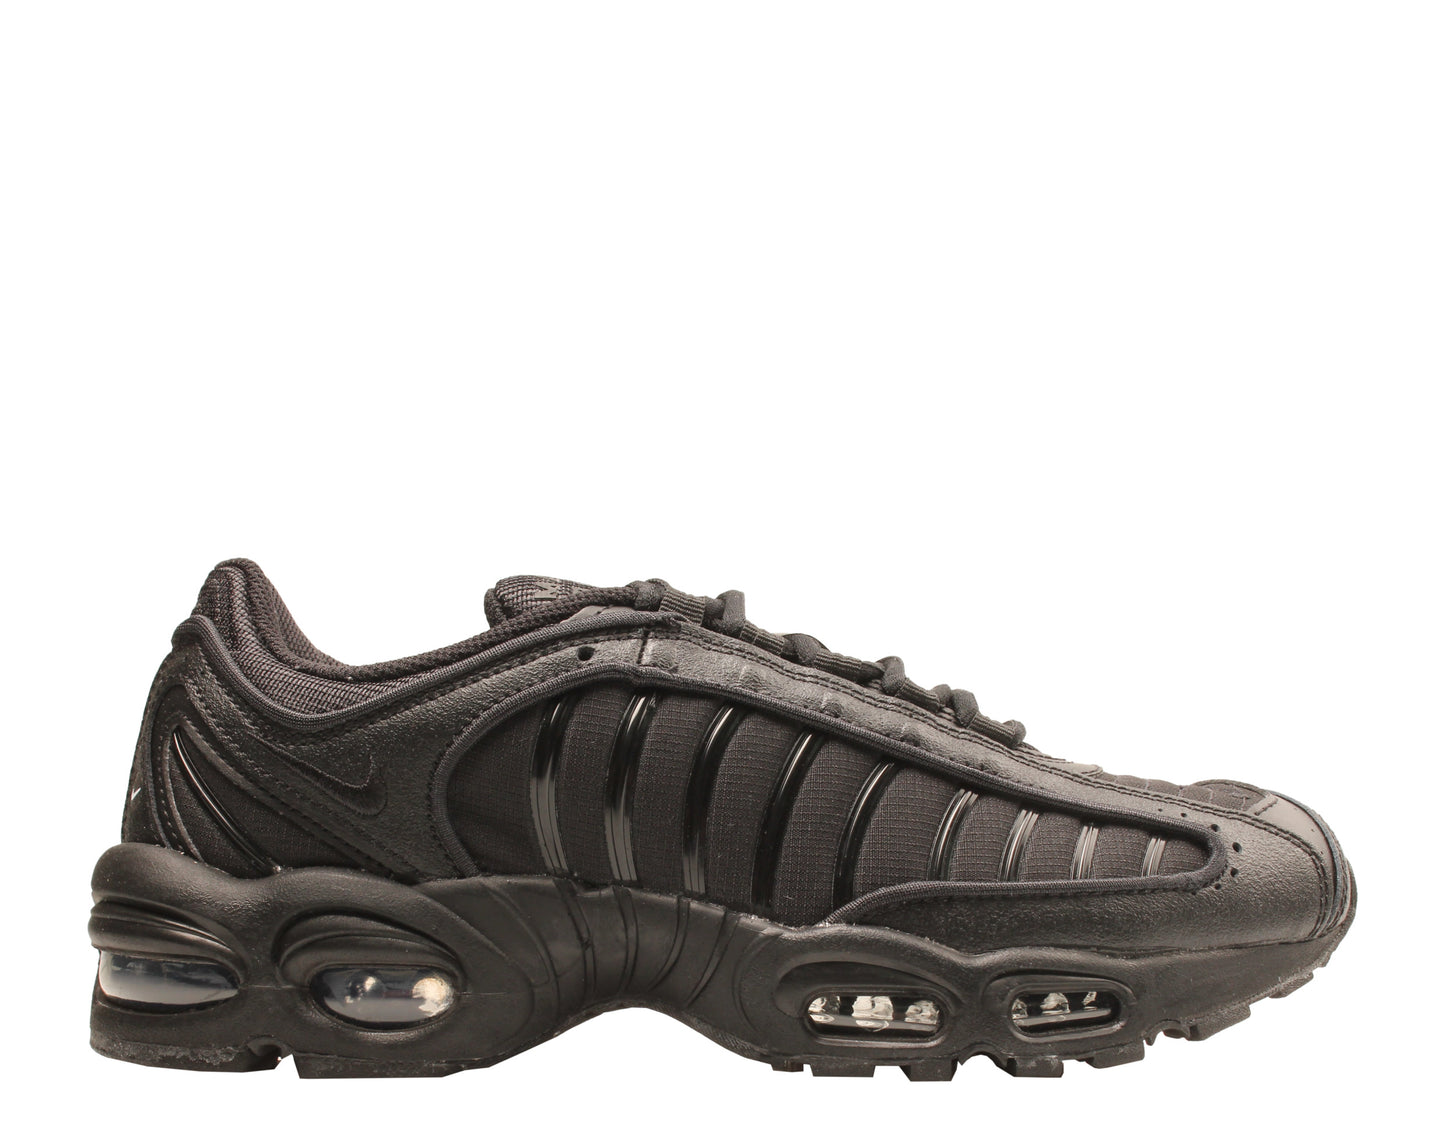 Nike Air Max Tailwind IV Men's Running Shoes